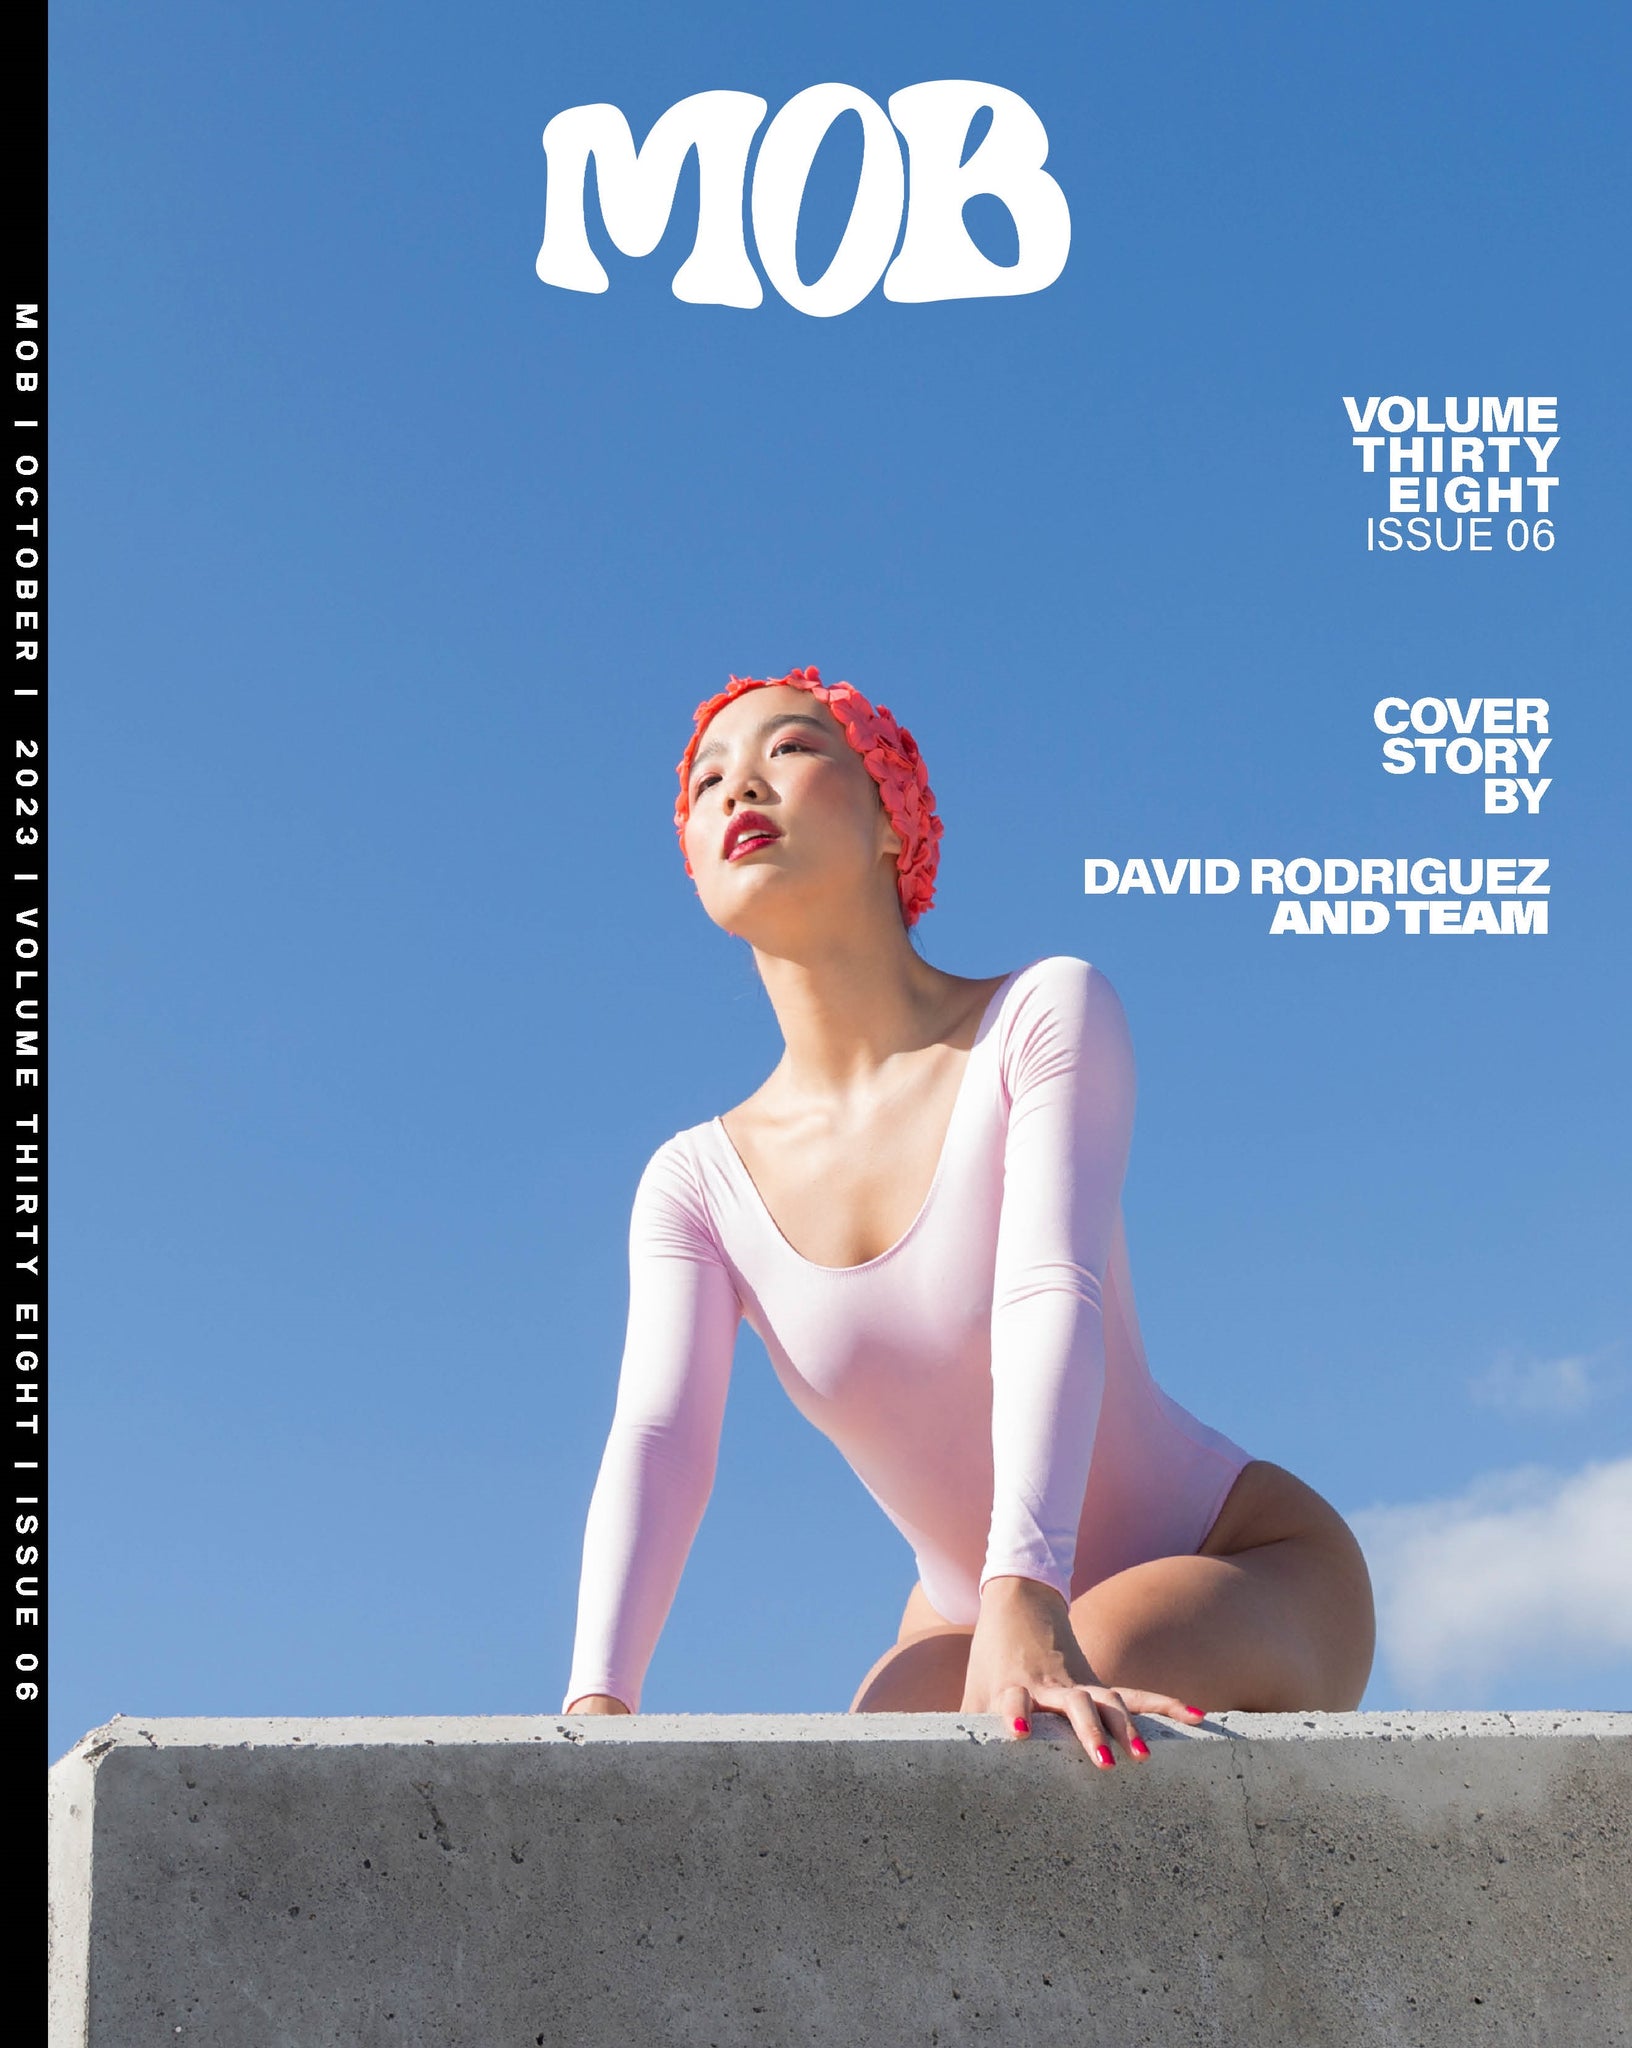 MOB JOURNAL | VOLUME THIRTY EIGHT | ISSUE #06